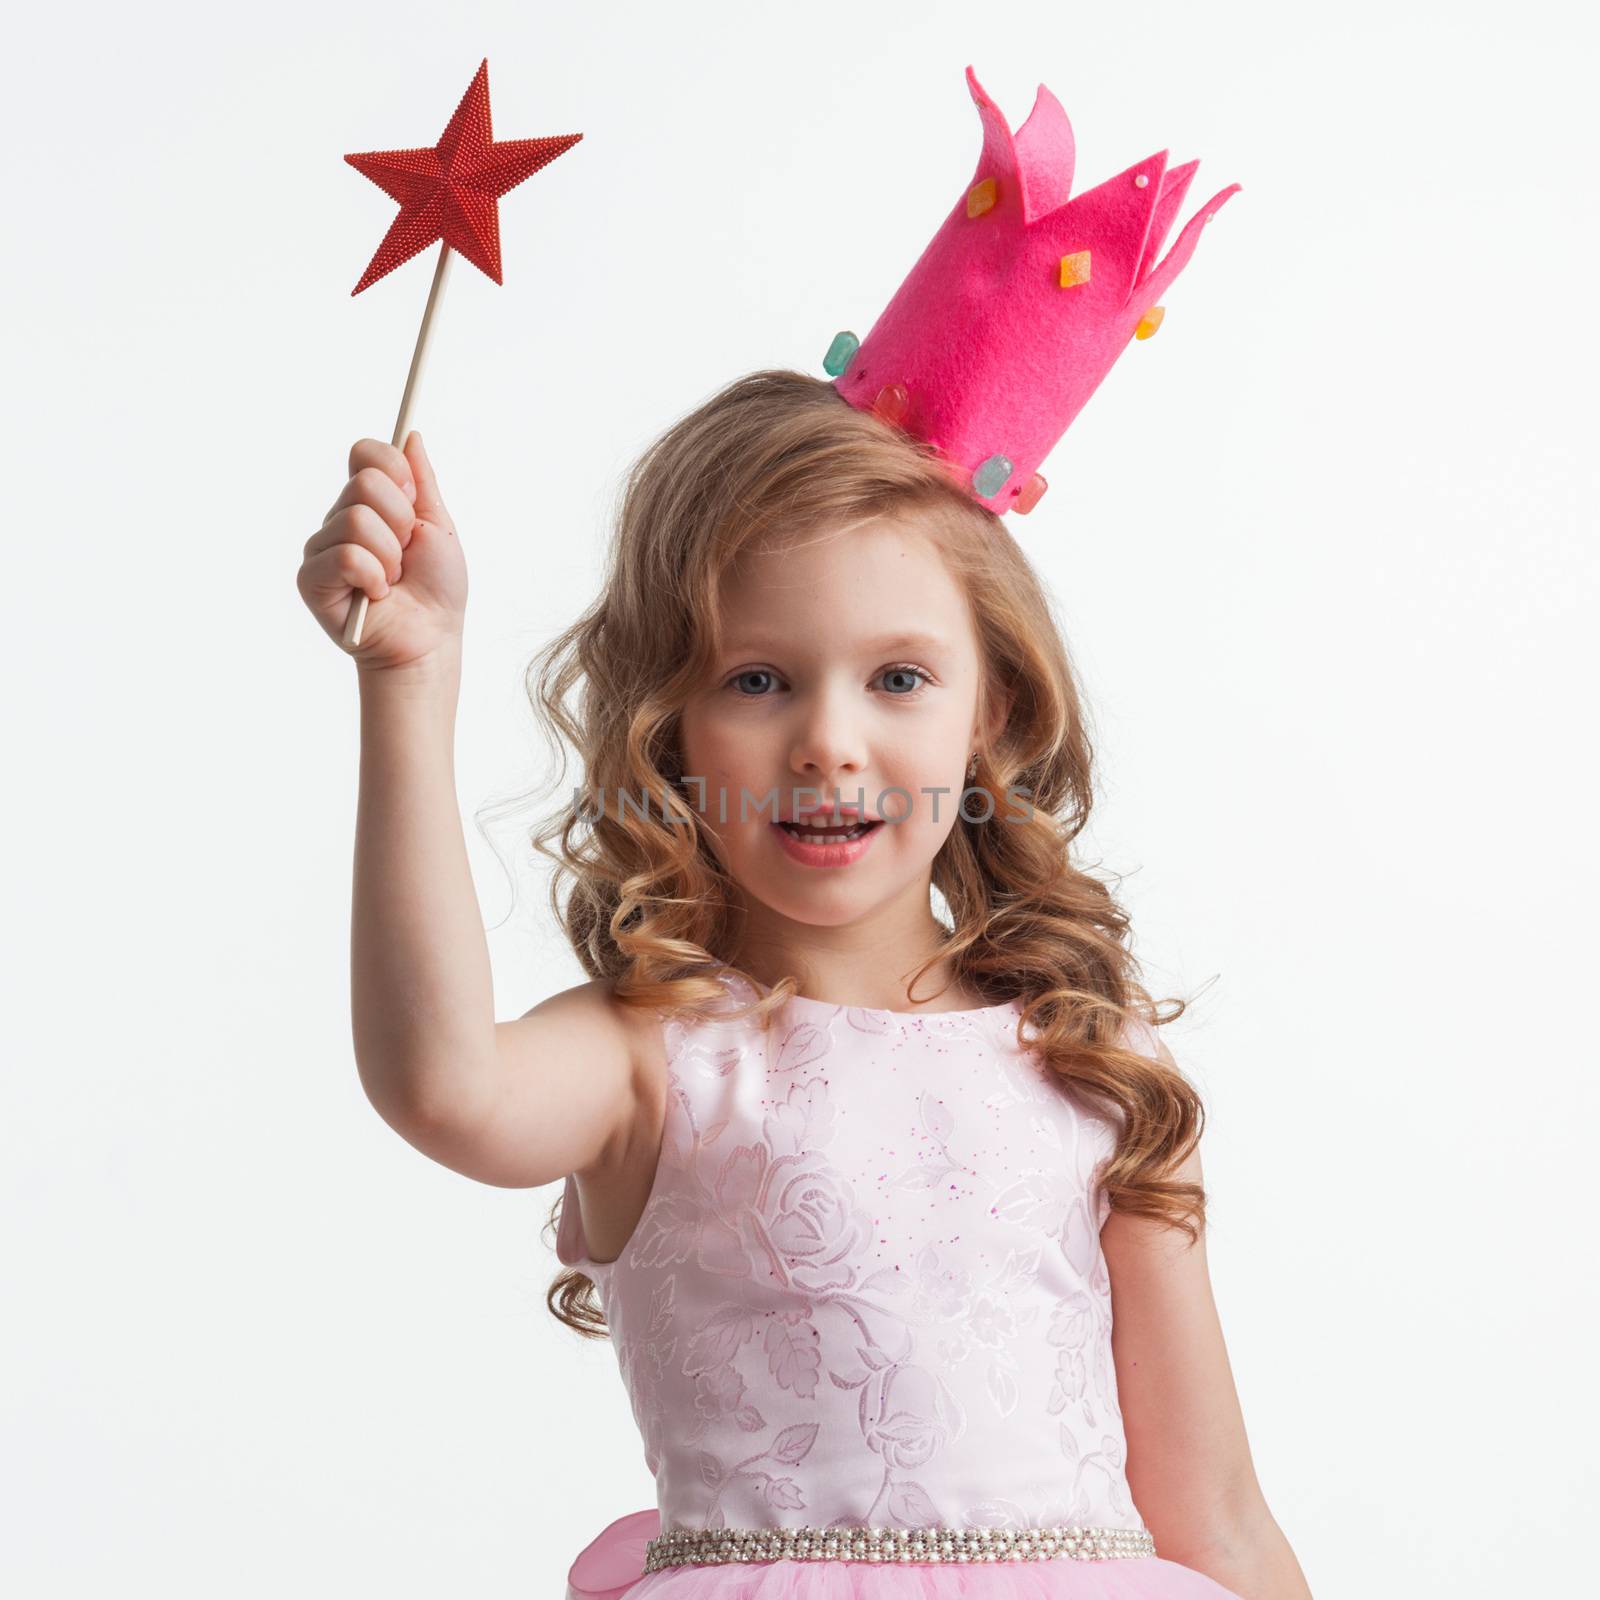 Beautiful little candy princess girl in crown holding star shaped magic wand and making a wish spell isolated on white background